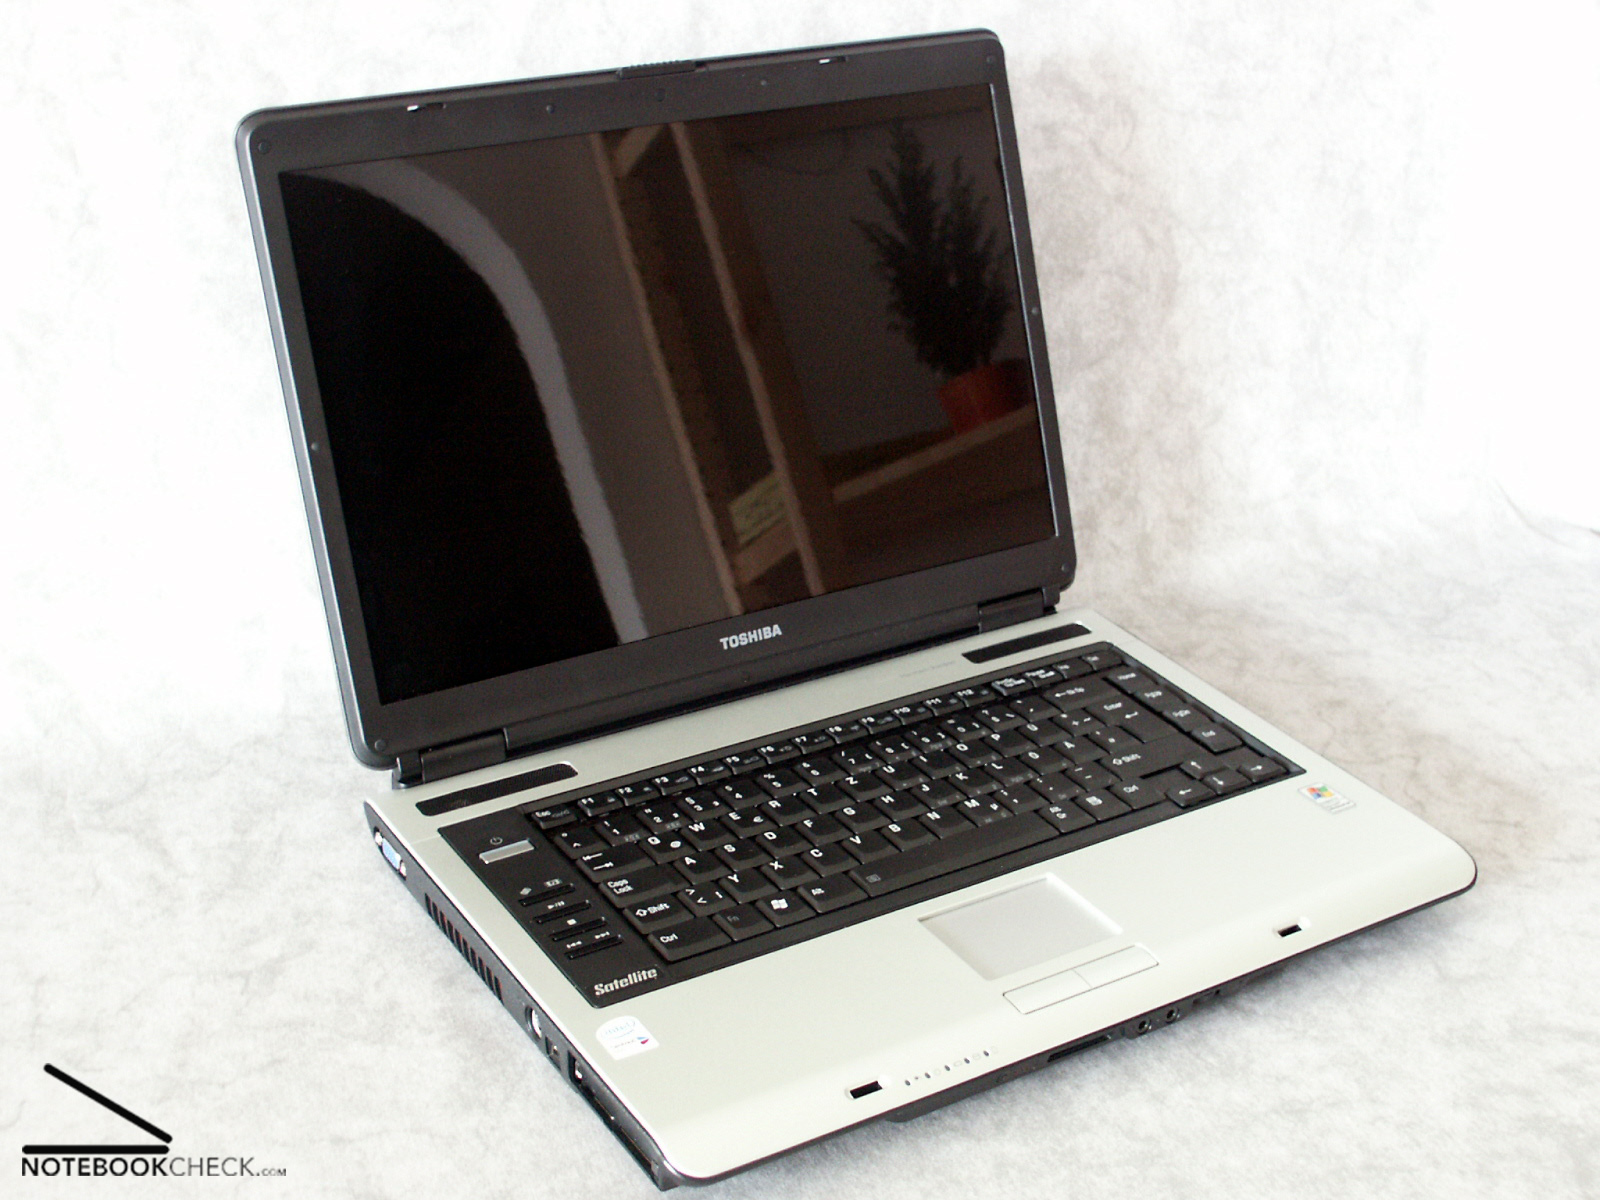 Toshiba satellite a135-s7403 drivers for mac